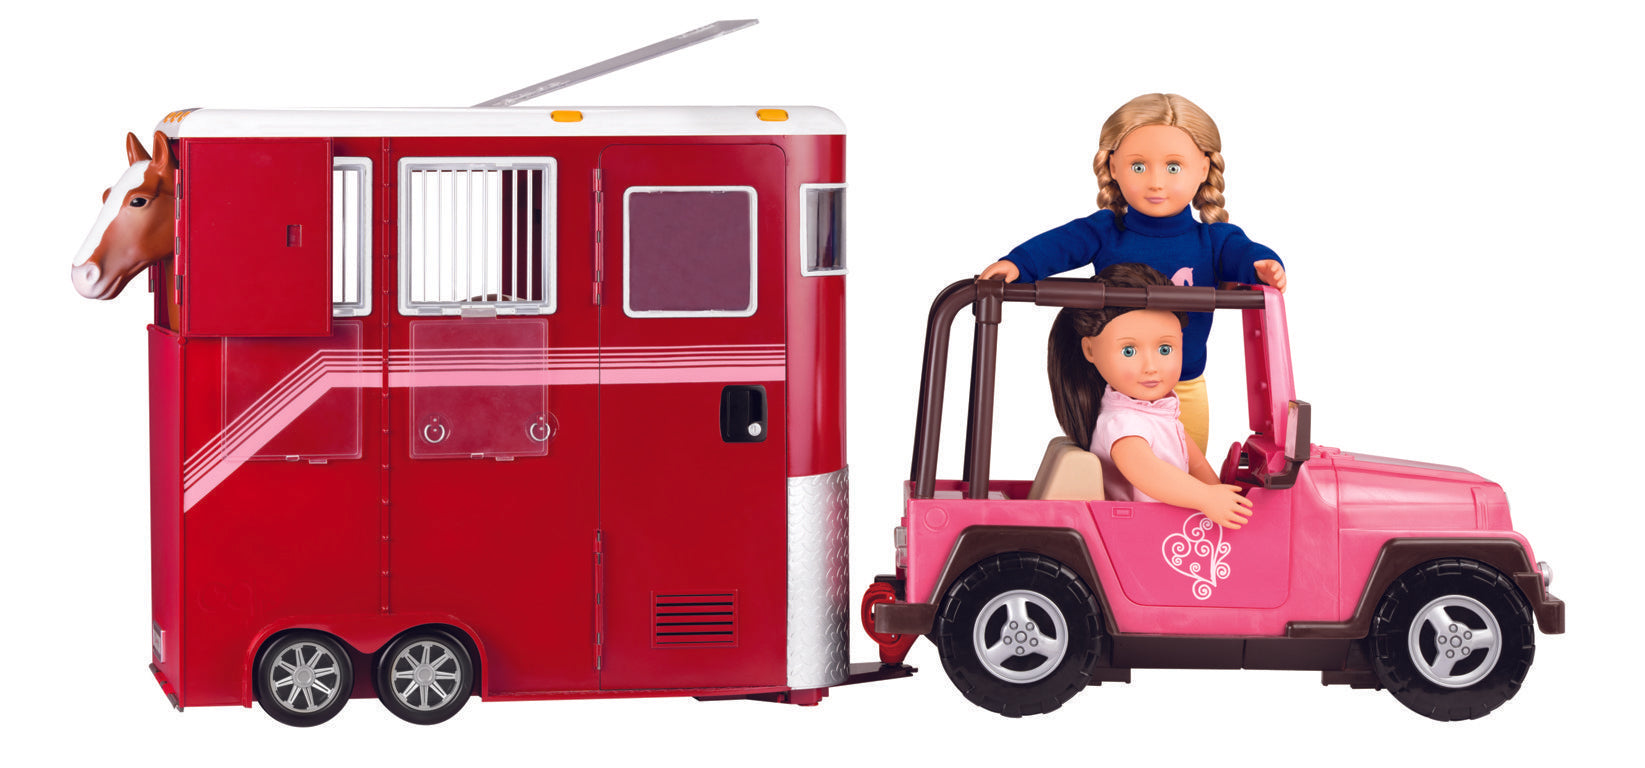 Our Generation Accessory - Horse Trailer - The Toy Wagon